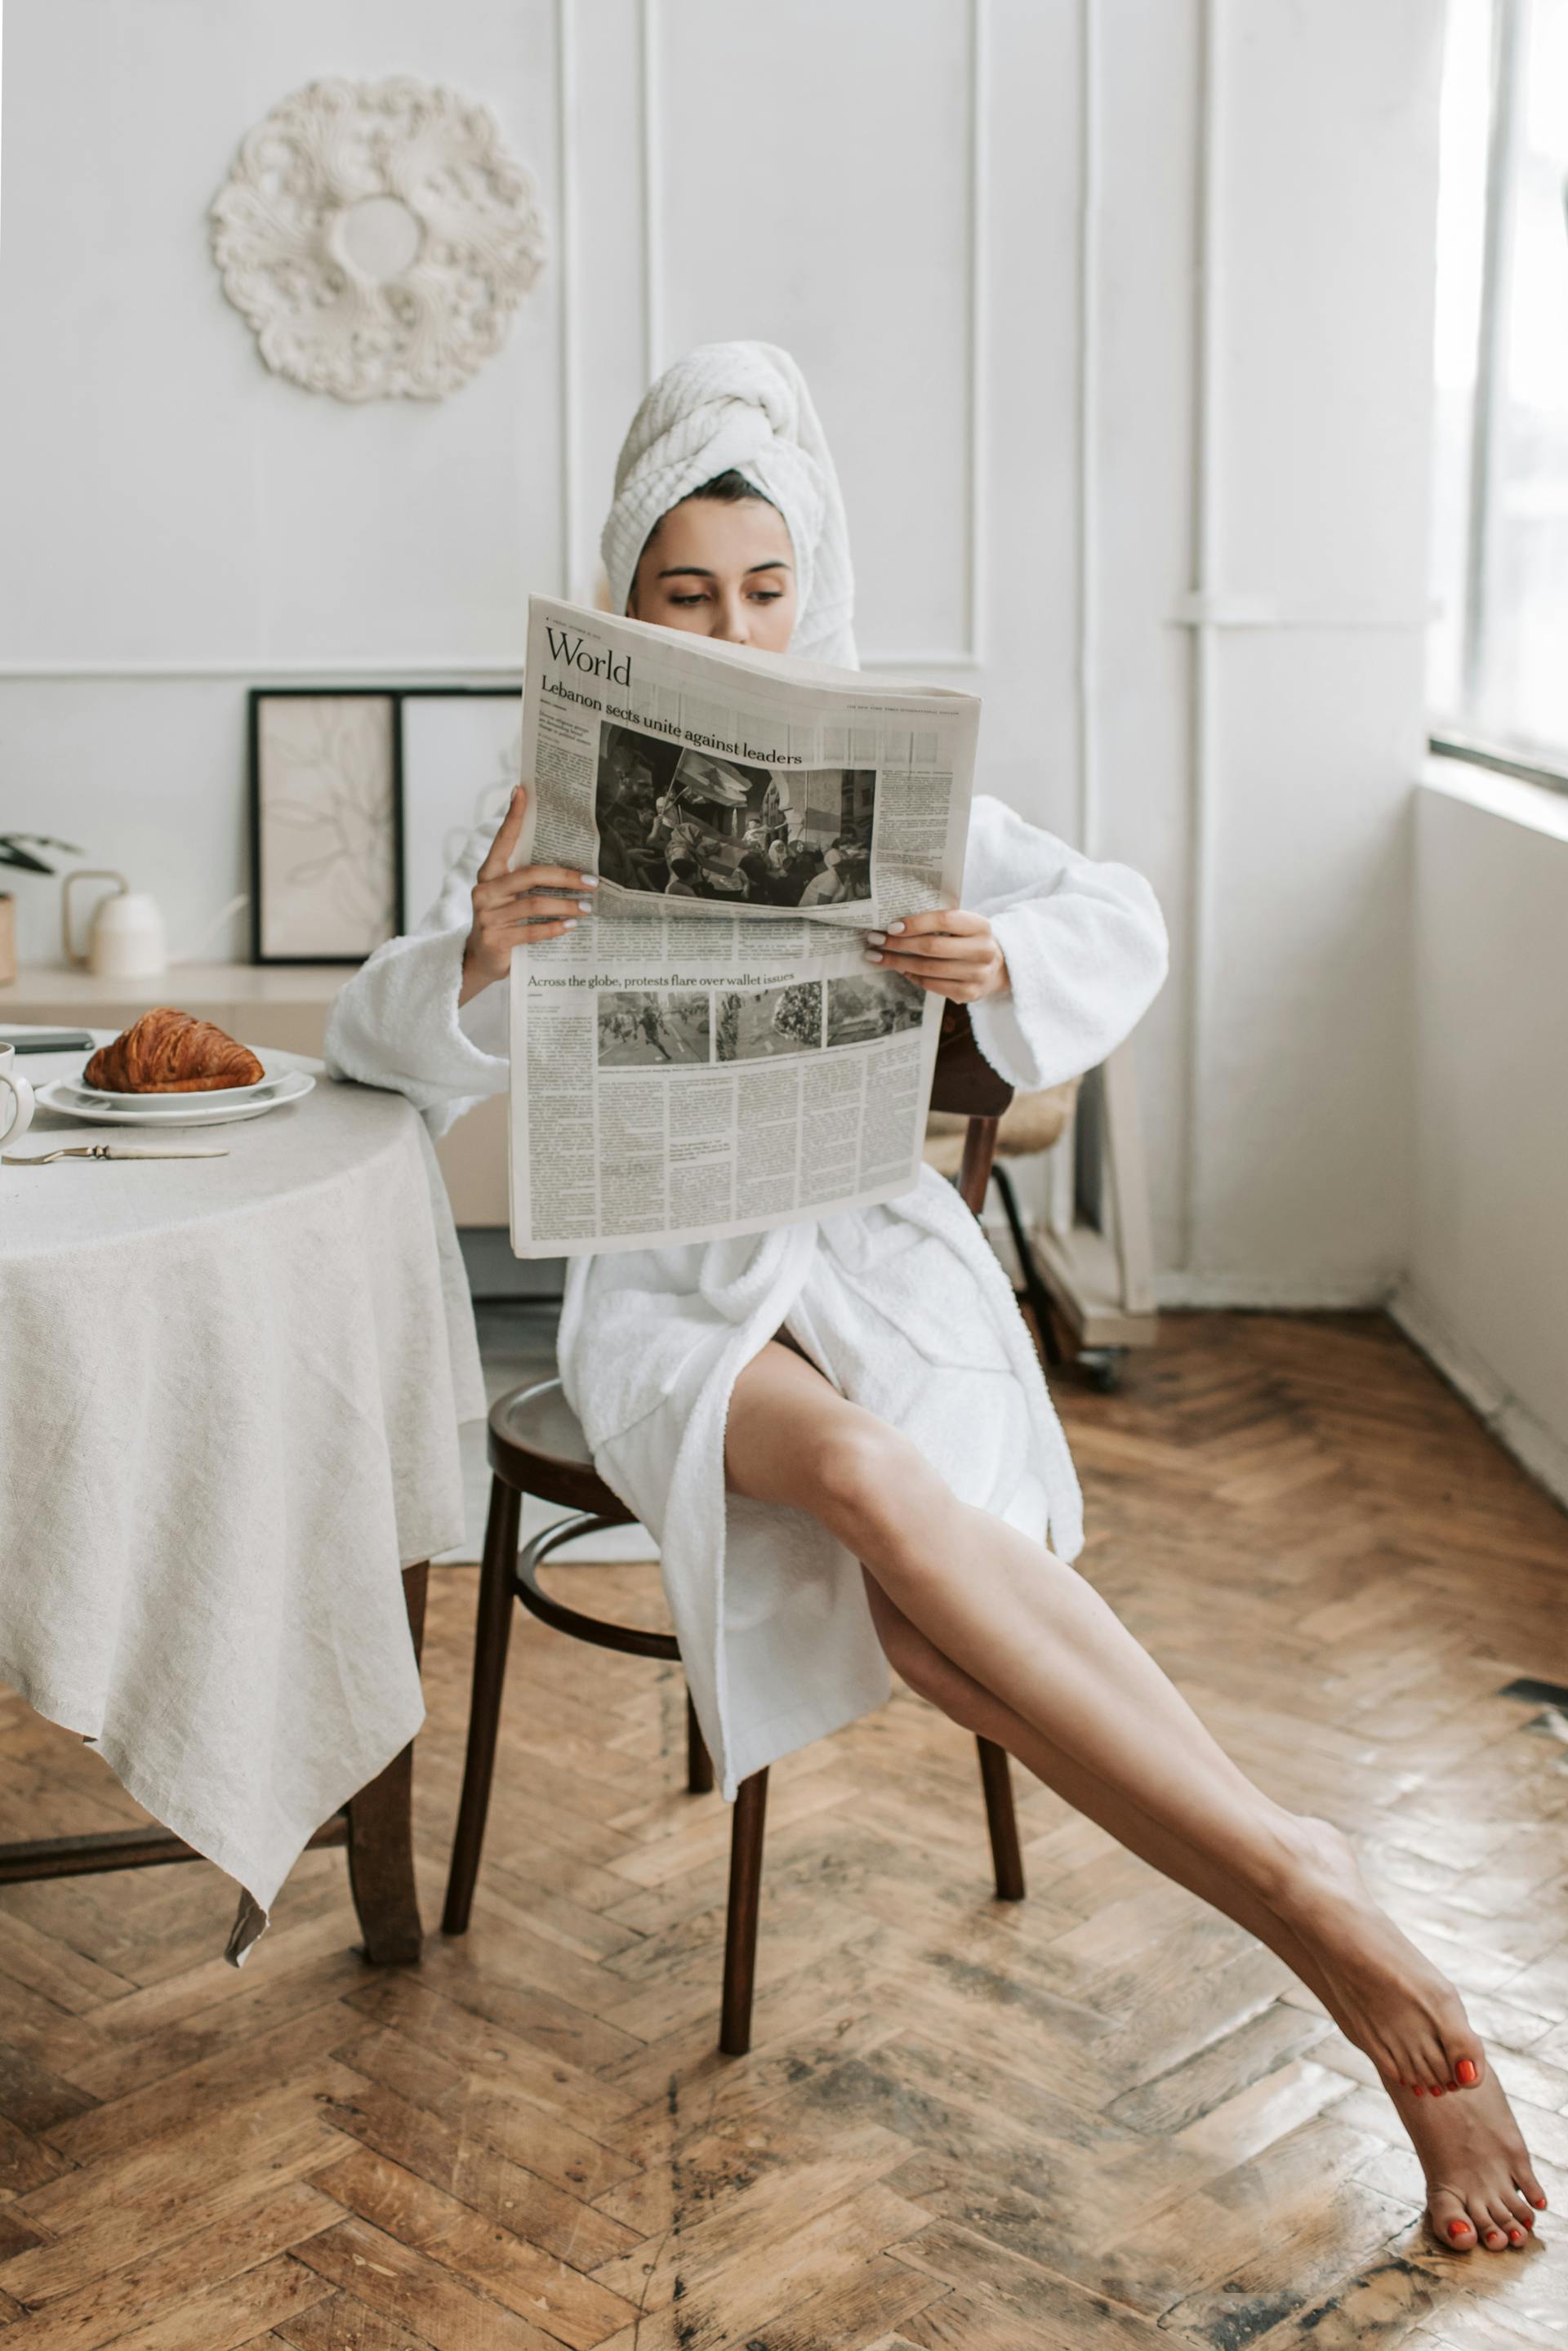 A woman reading a newspaper in her bathrobe | Source: Pexels